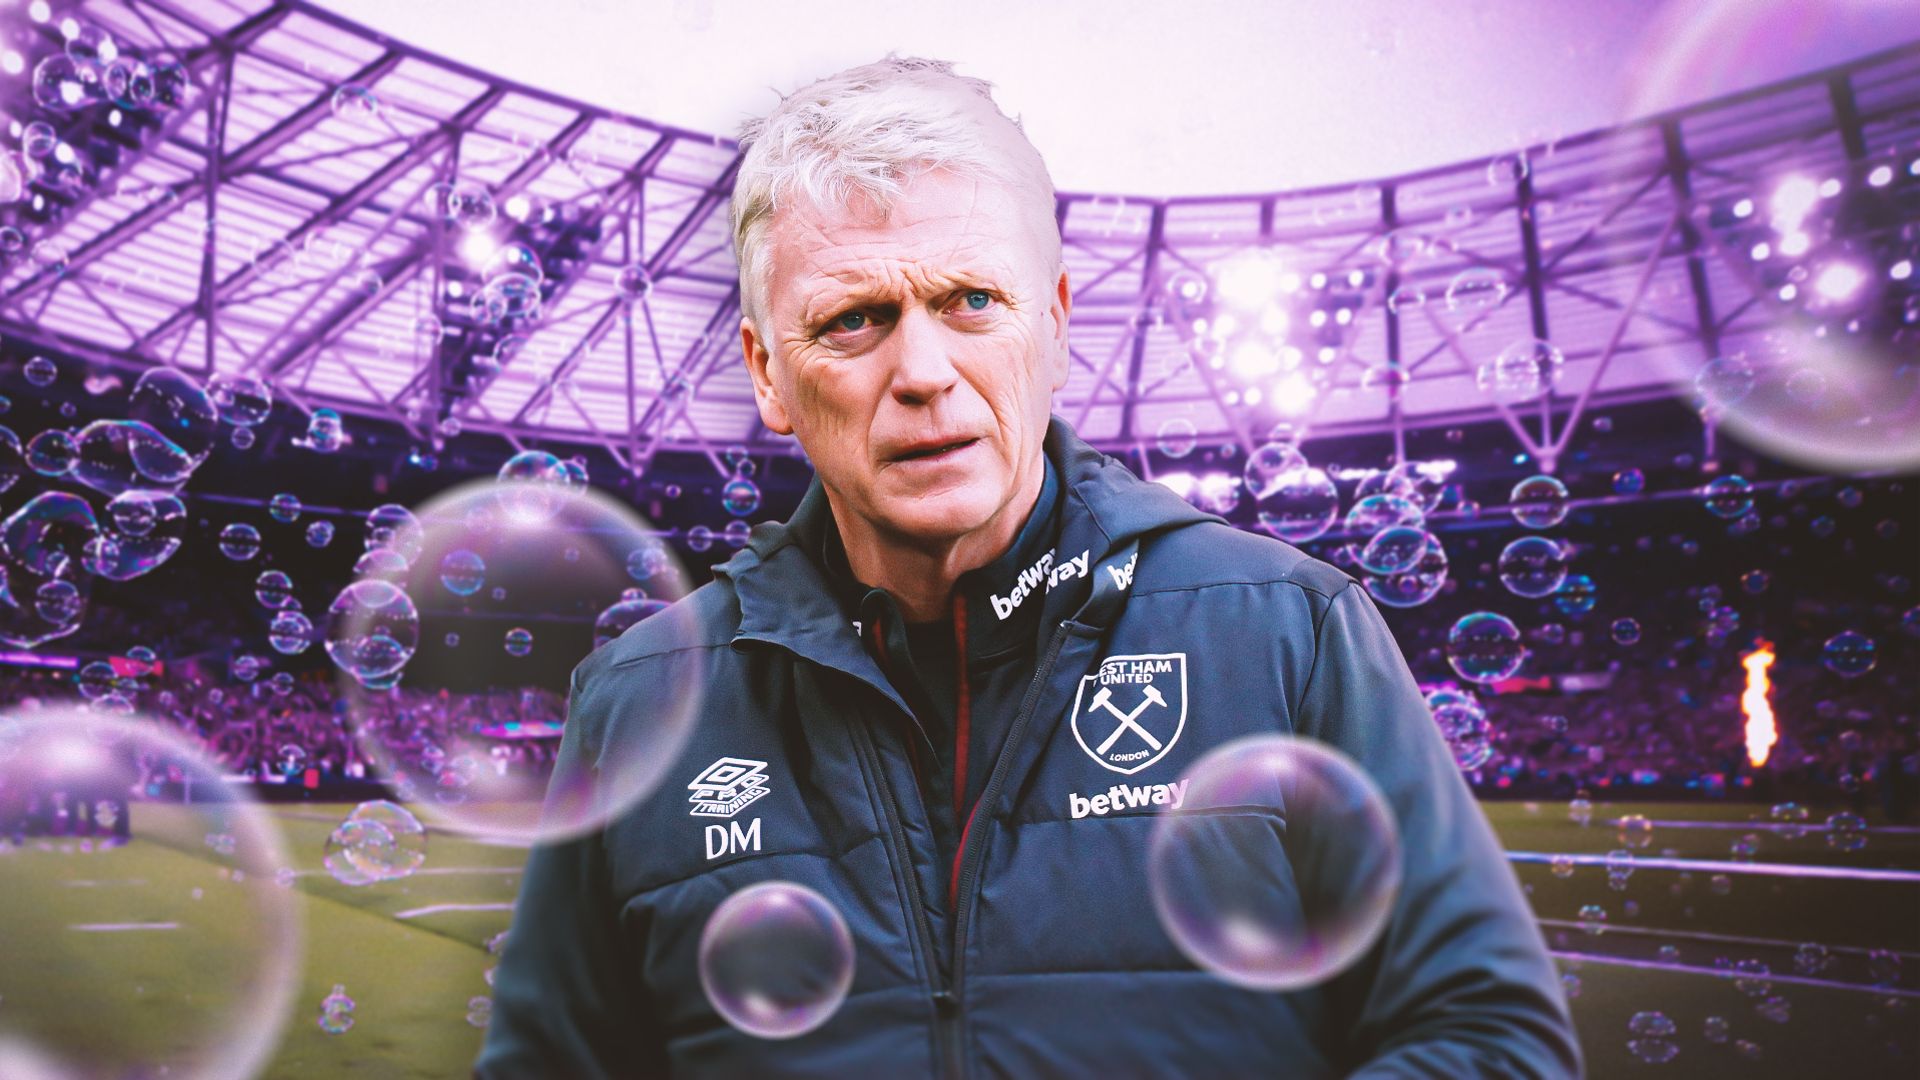 Why Moyes is leaving West Ham: From Steidten's ban to need for change